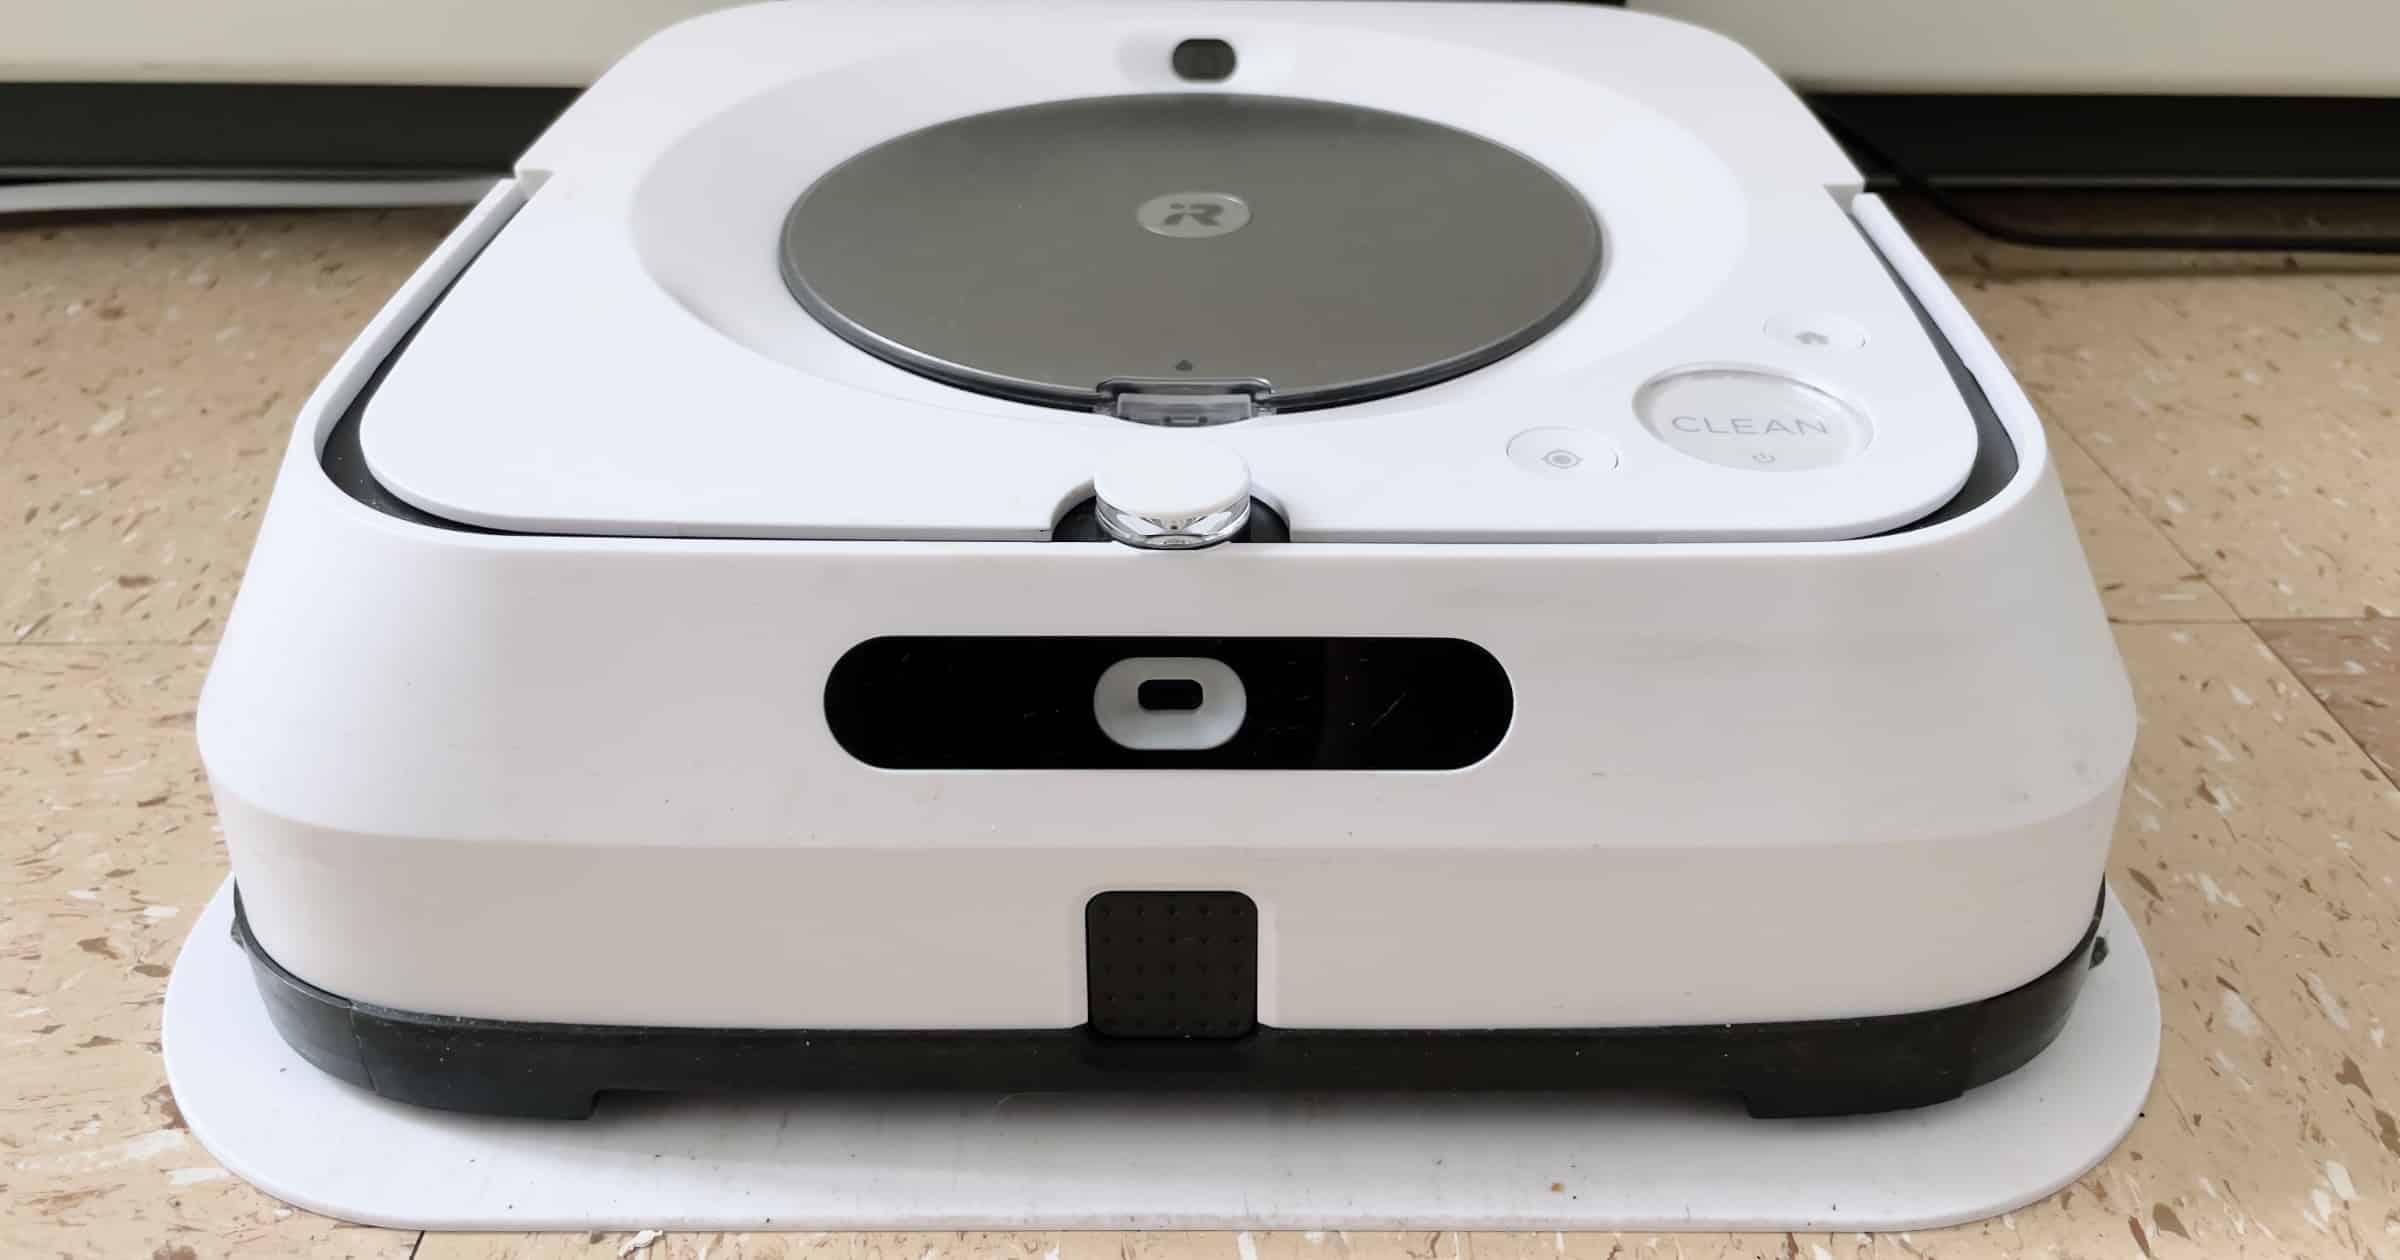 Review: iRobot's Braava Jet M6 is a Thorough Creature- The Mac